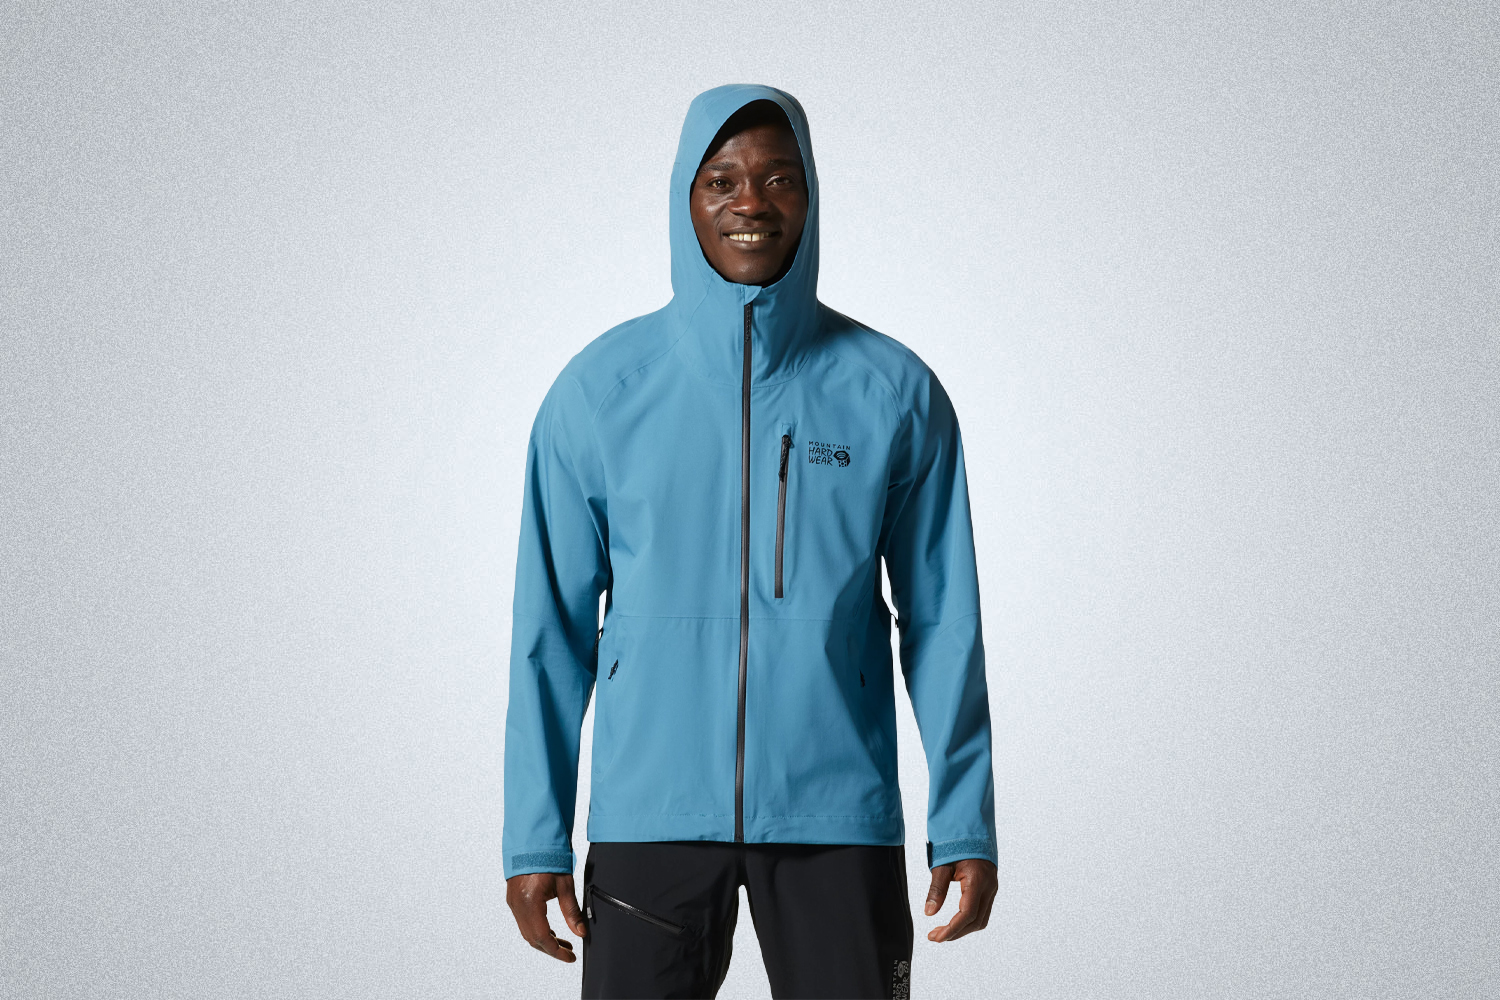 The Mountain Hardwear Stretch Ozonic Jacket is one of the best rain jackets for days at the beach in 2022